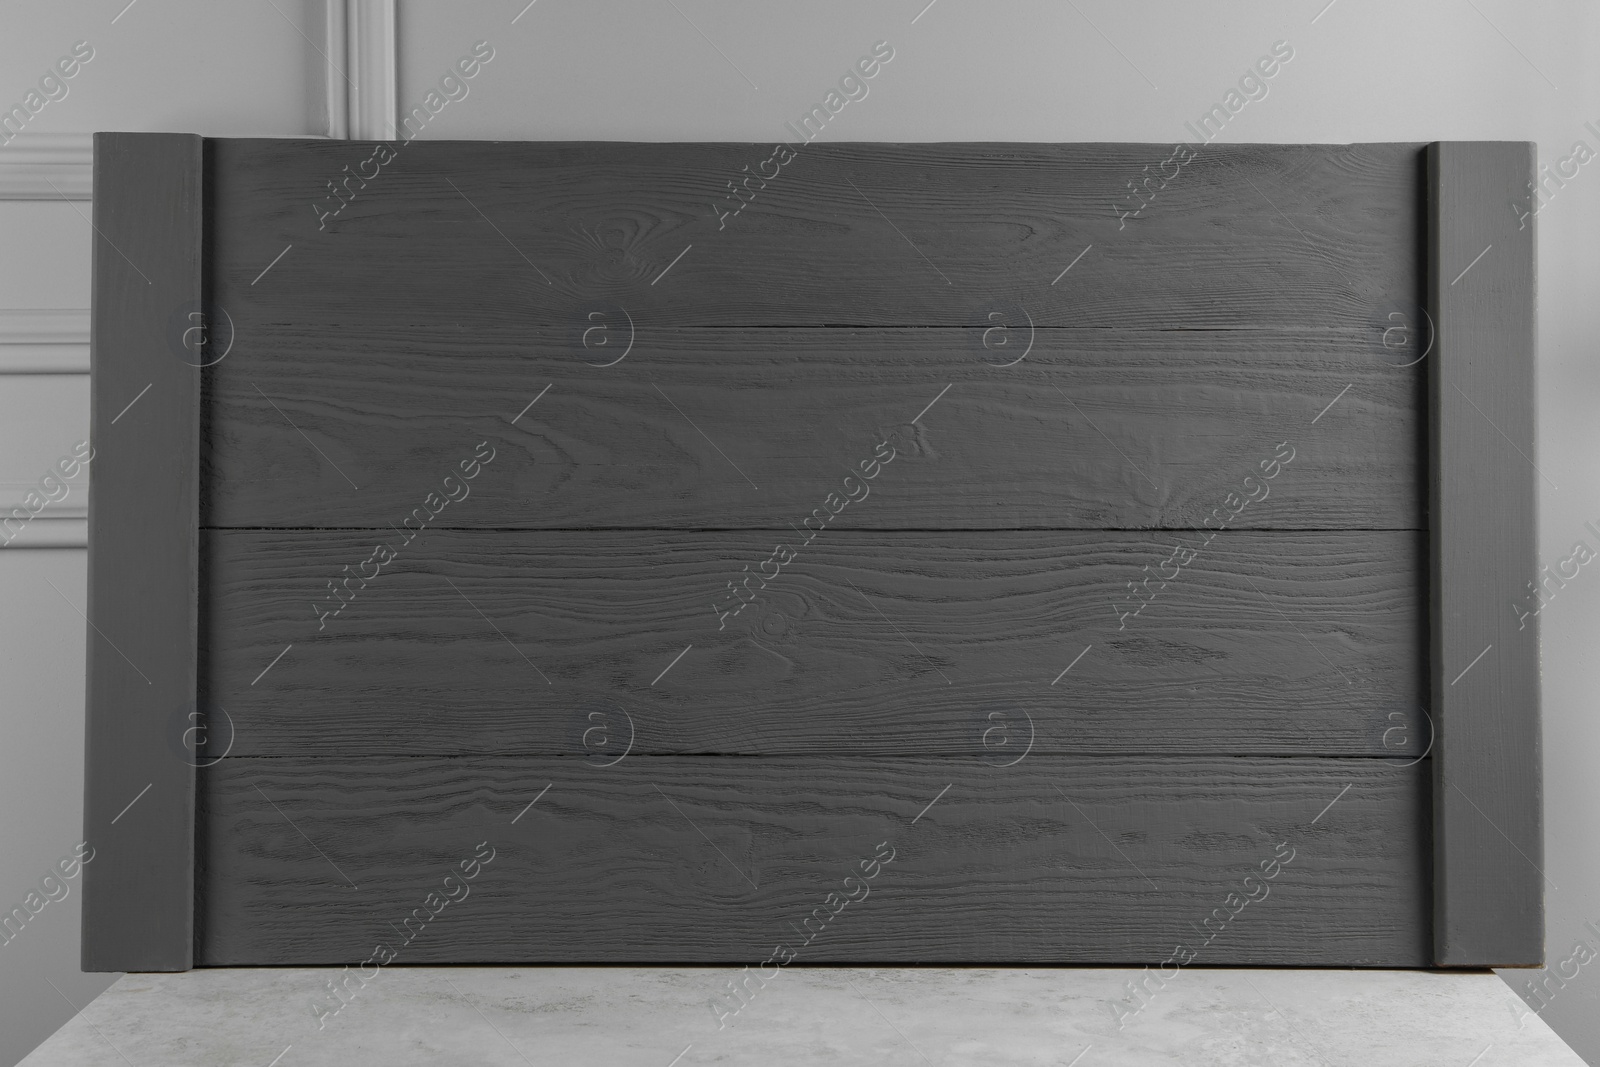 Photo of Wooden board on table near light grey wall